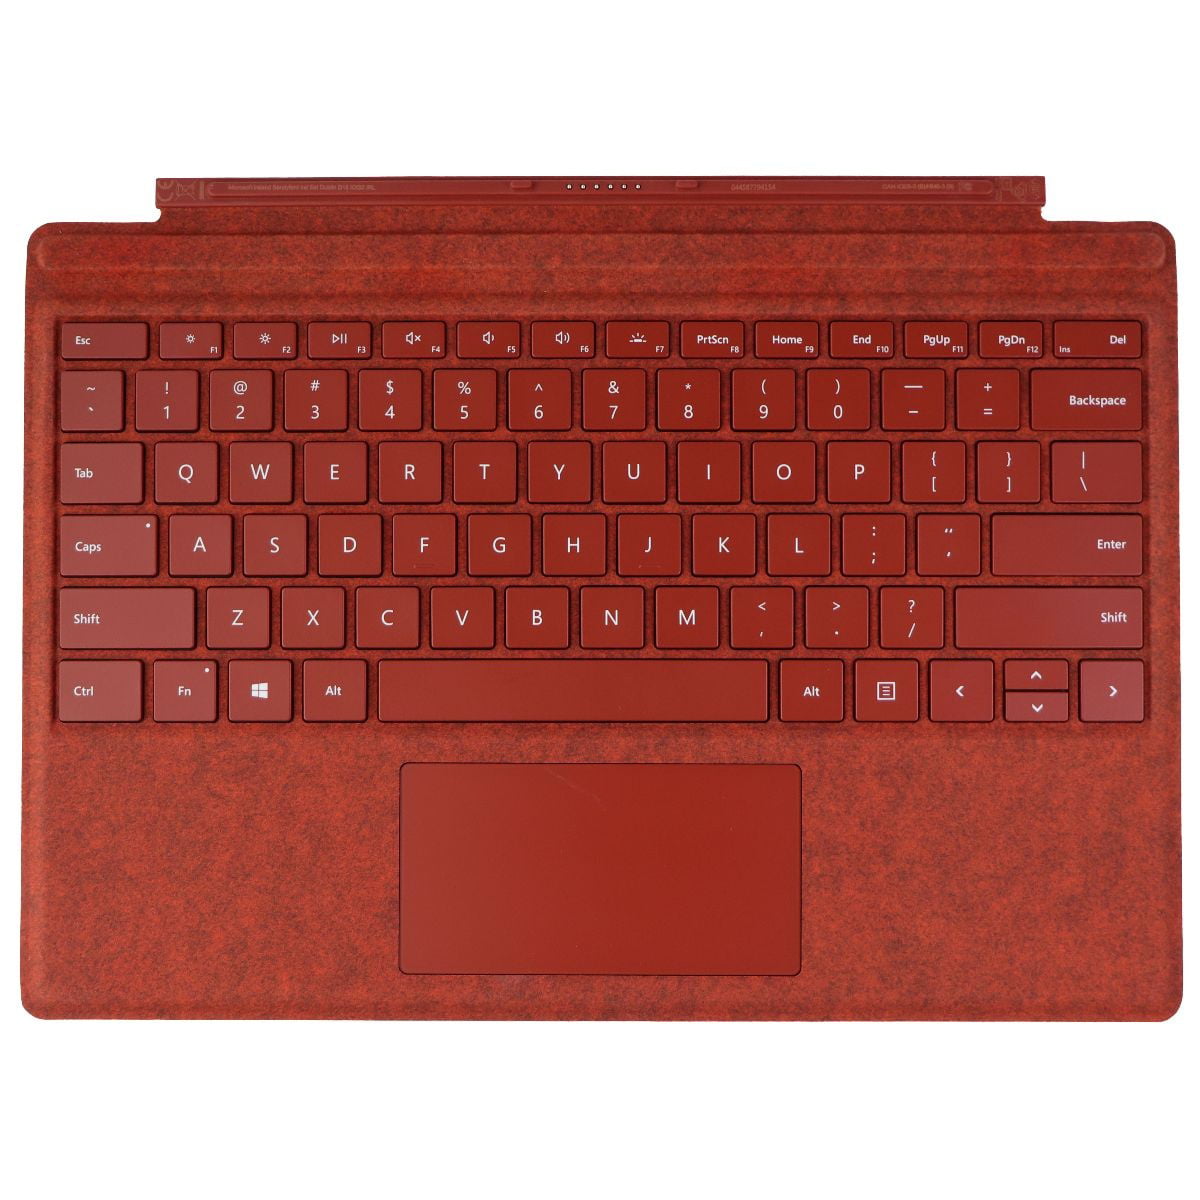 windows surface pro keyboard third party